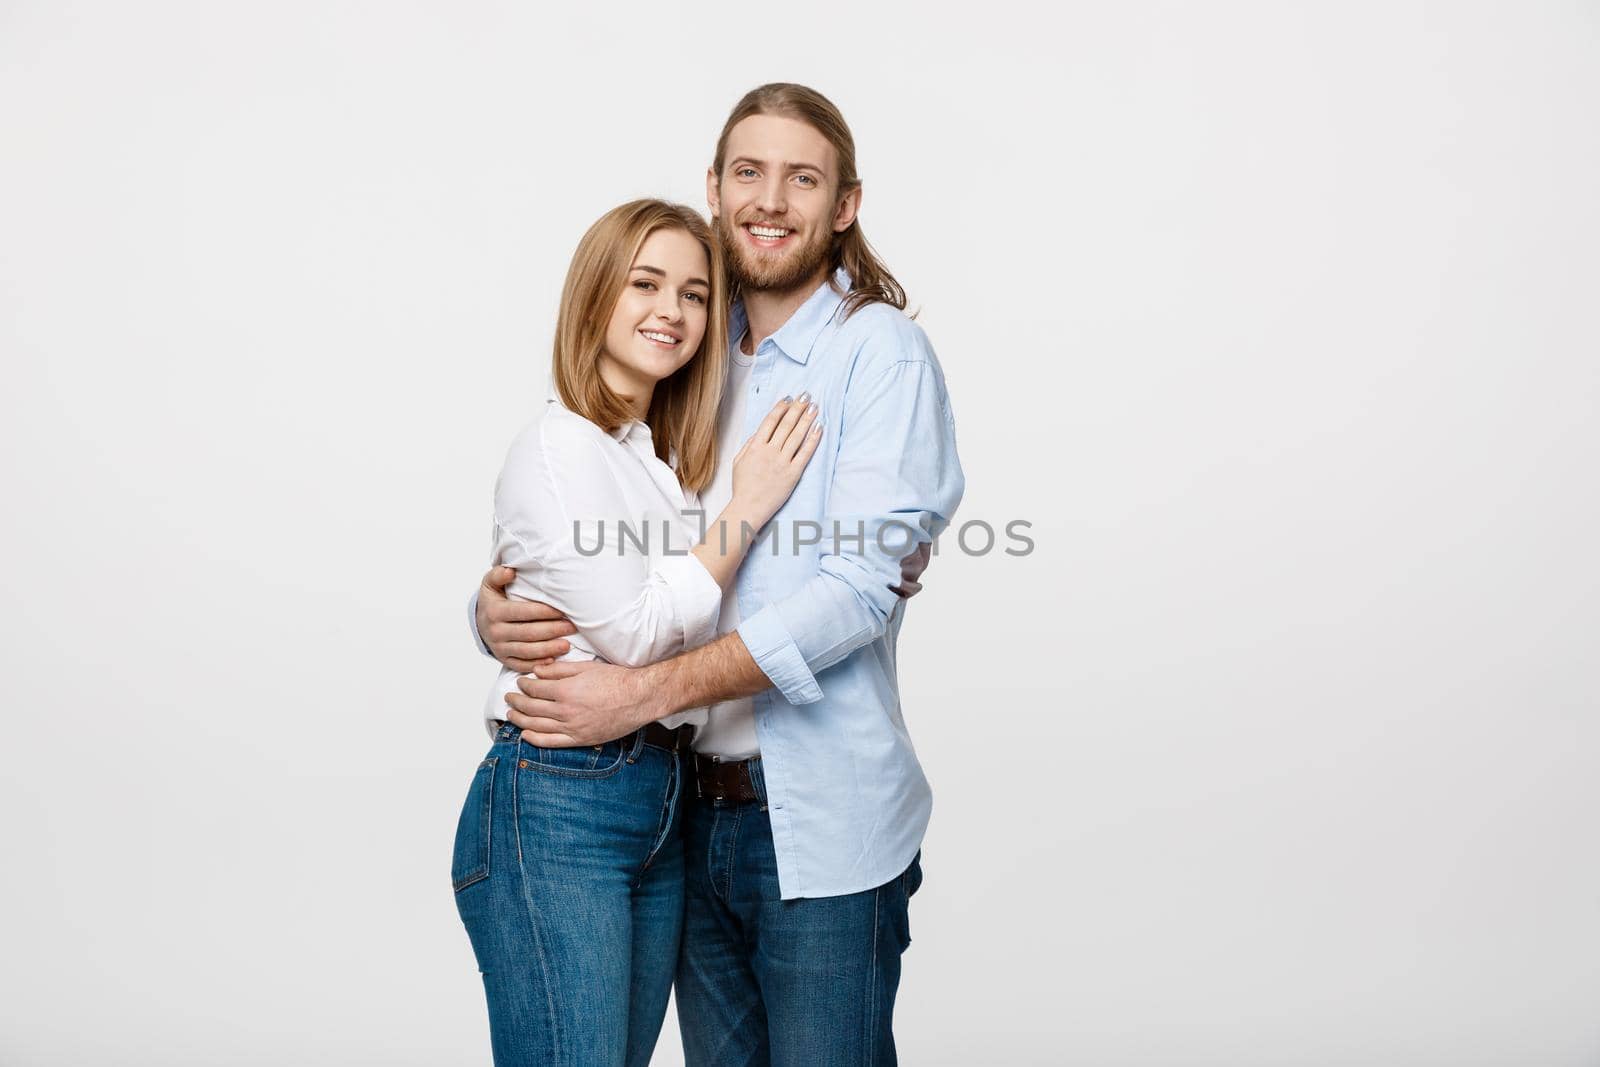 Portrait of cheerful young couple standing and hugging each other on isolated white background.